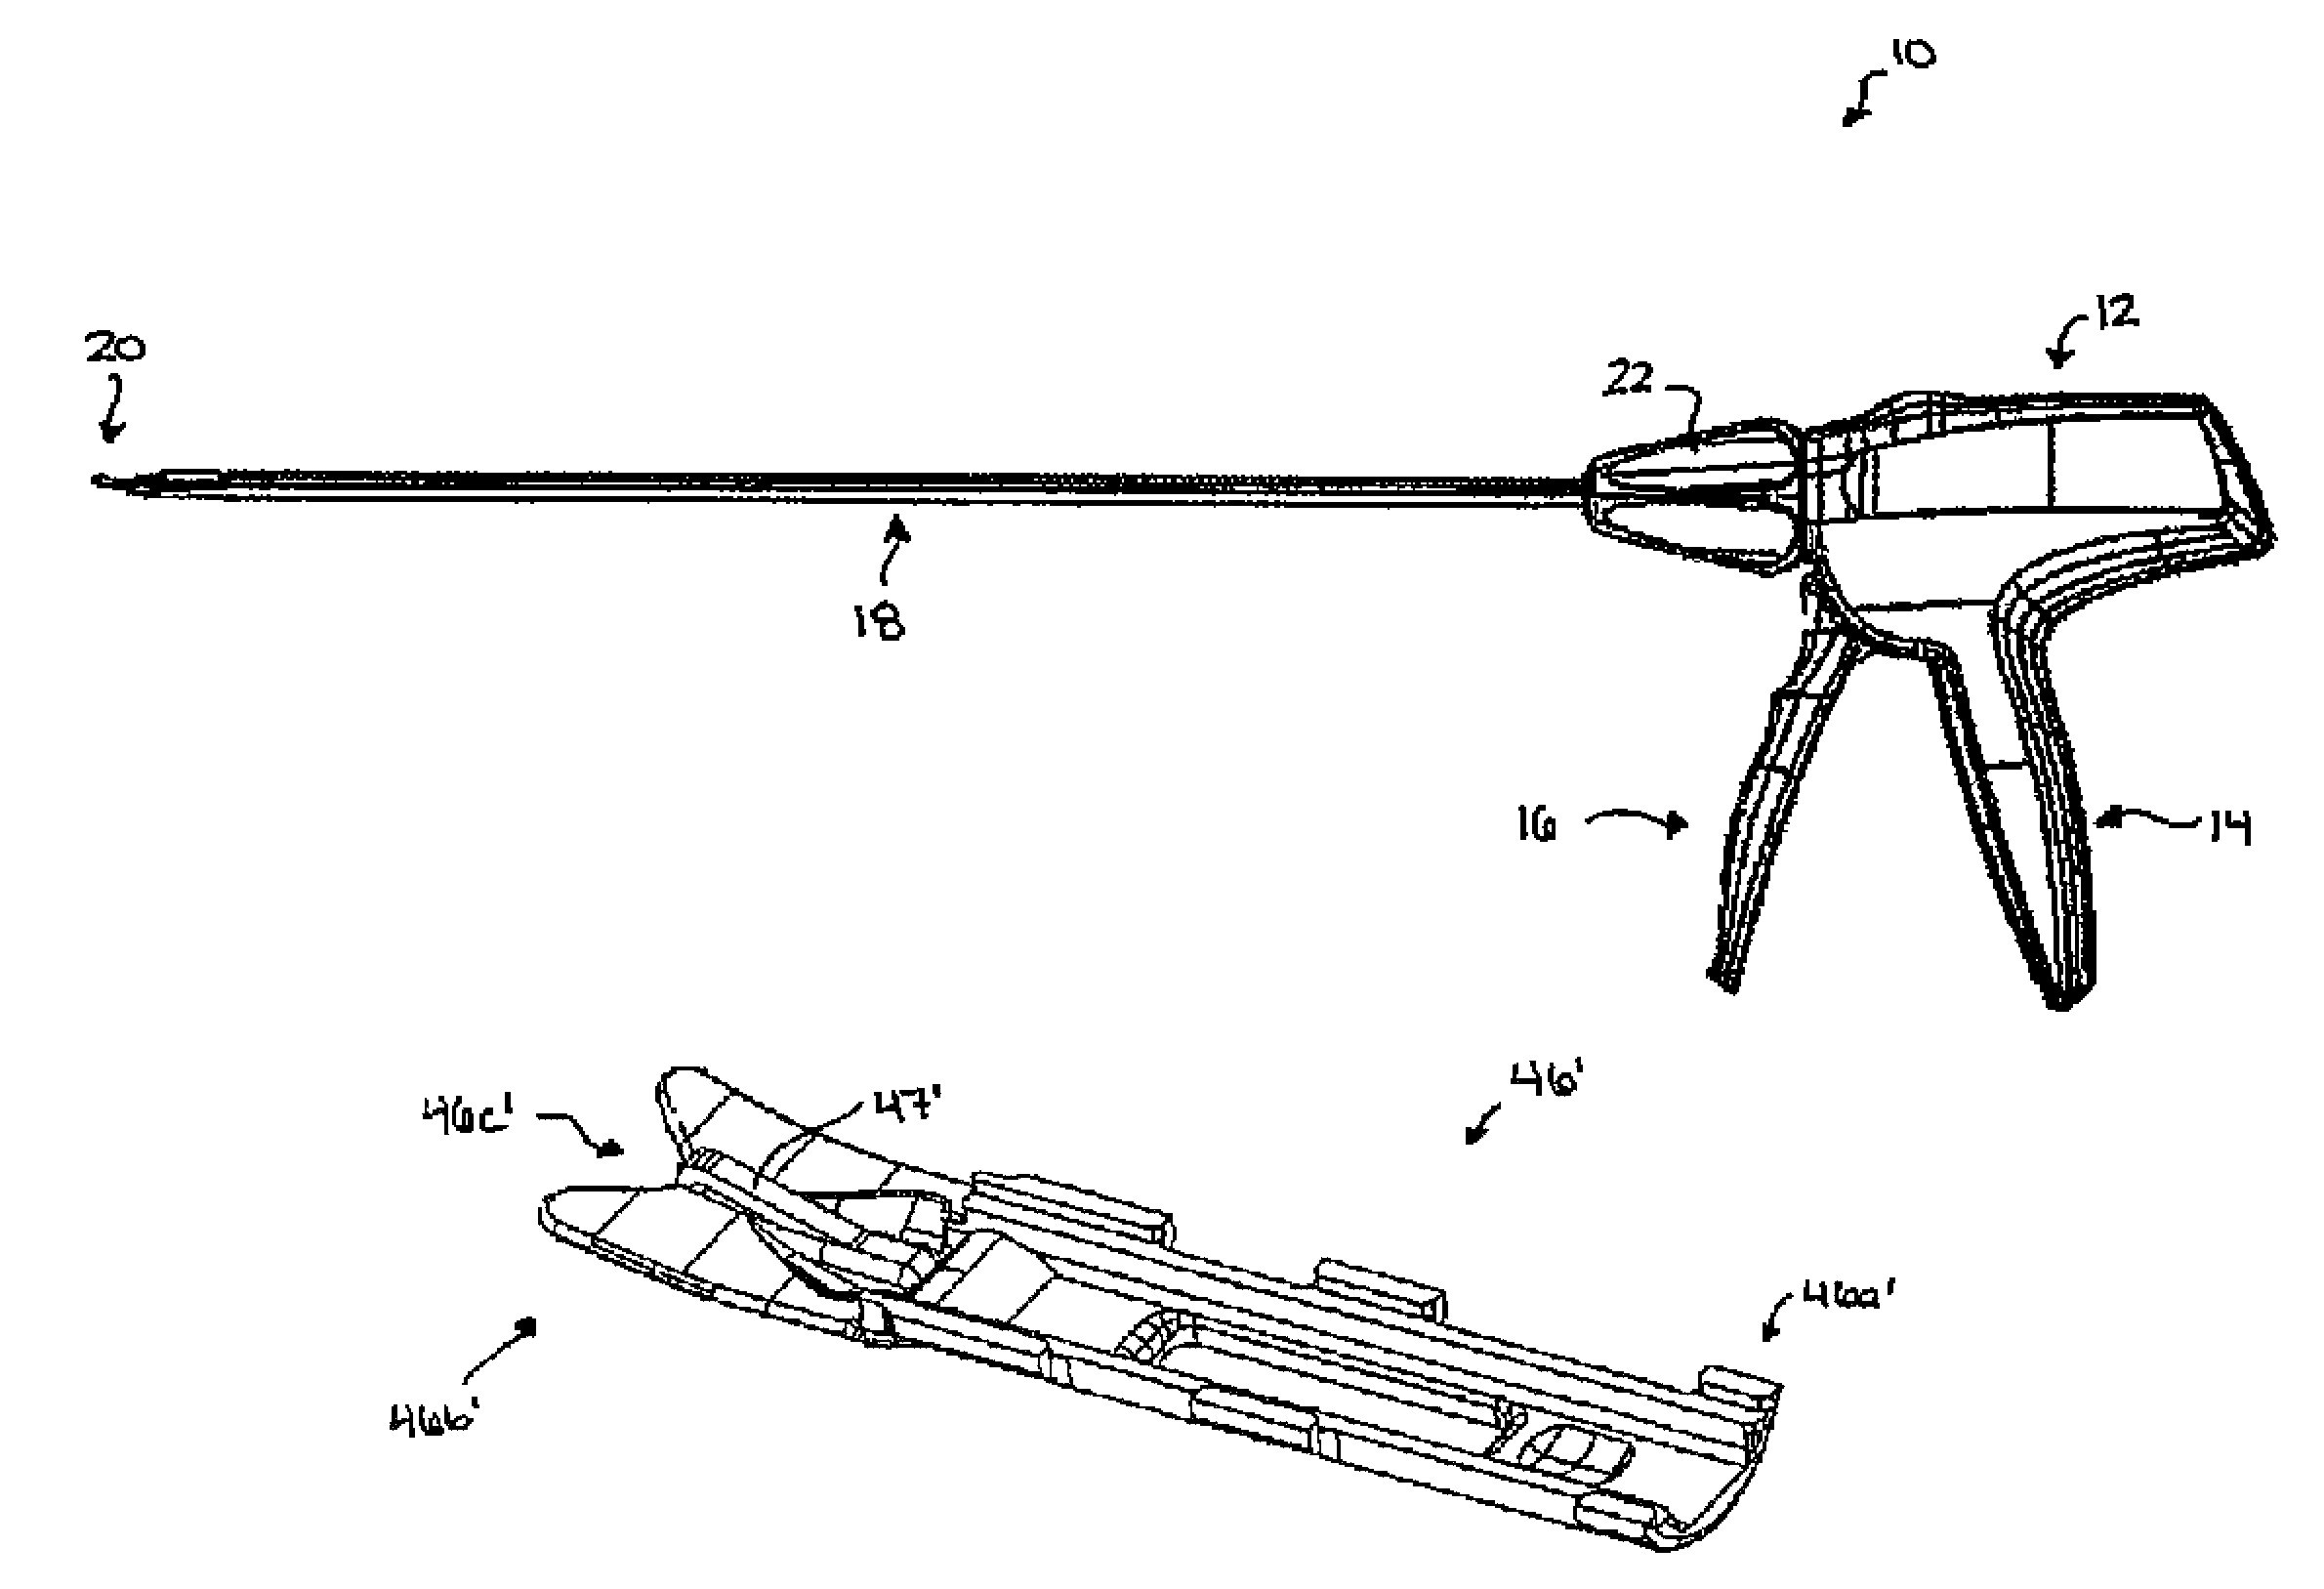 Clip advancer mechanism with alignment features